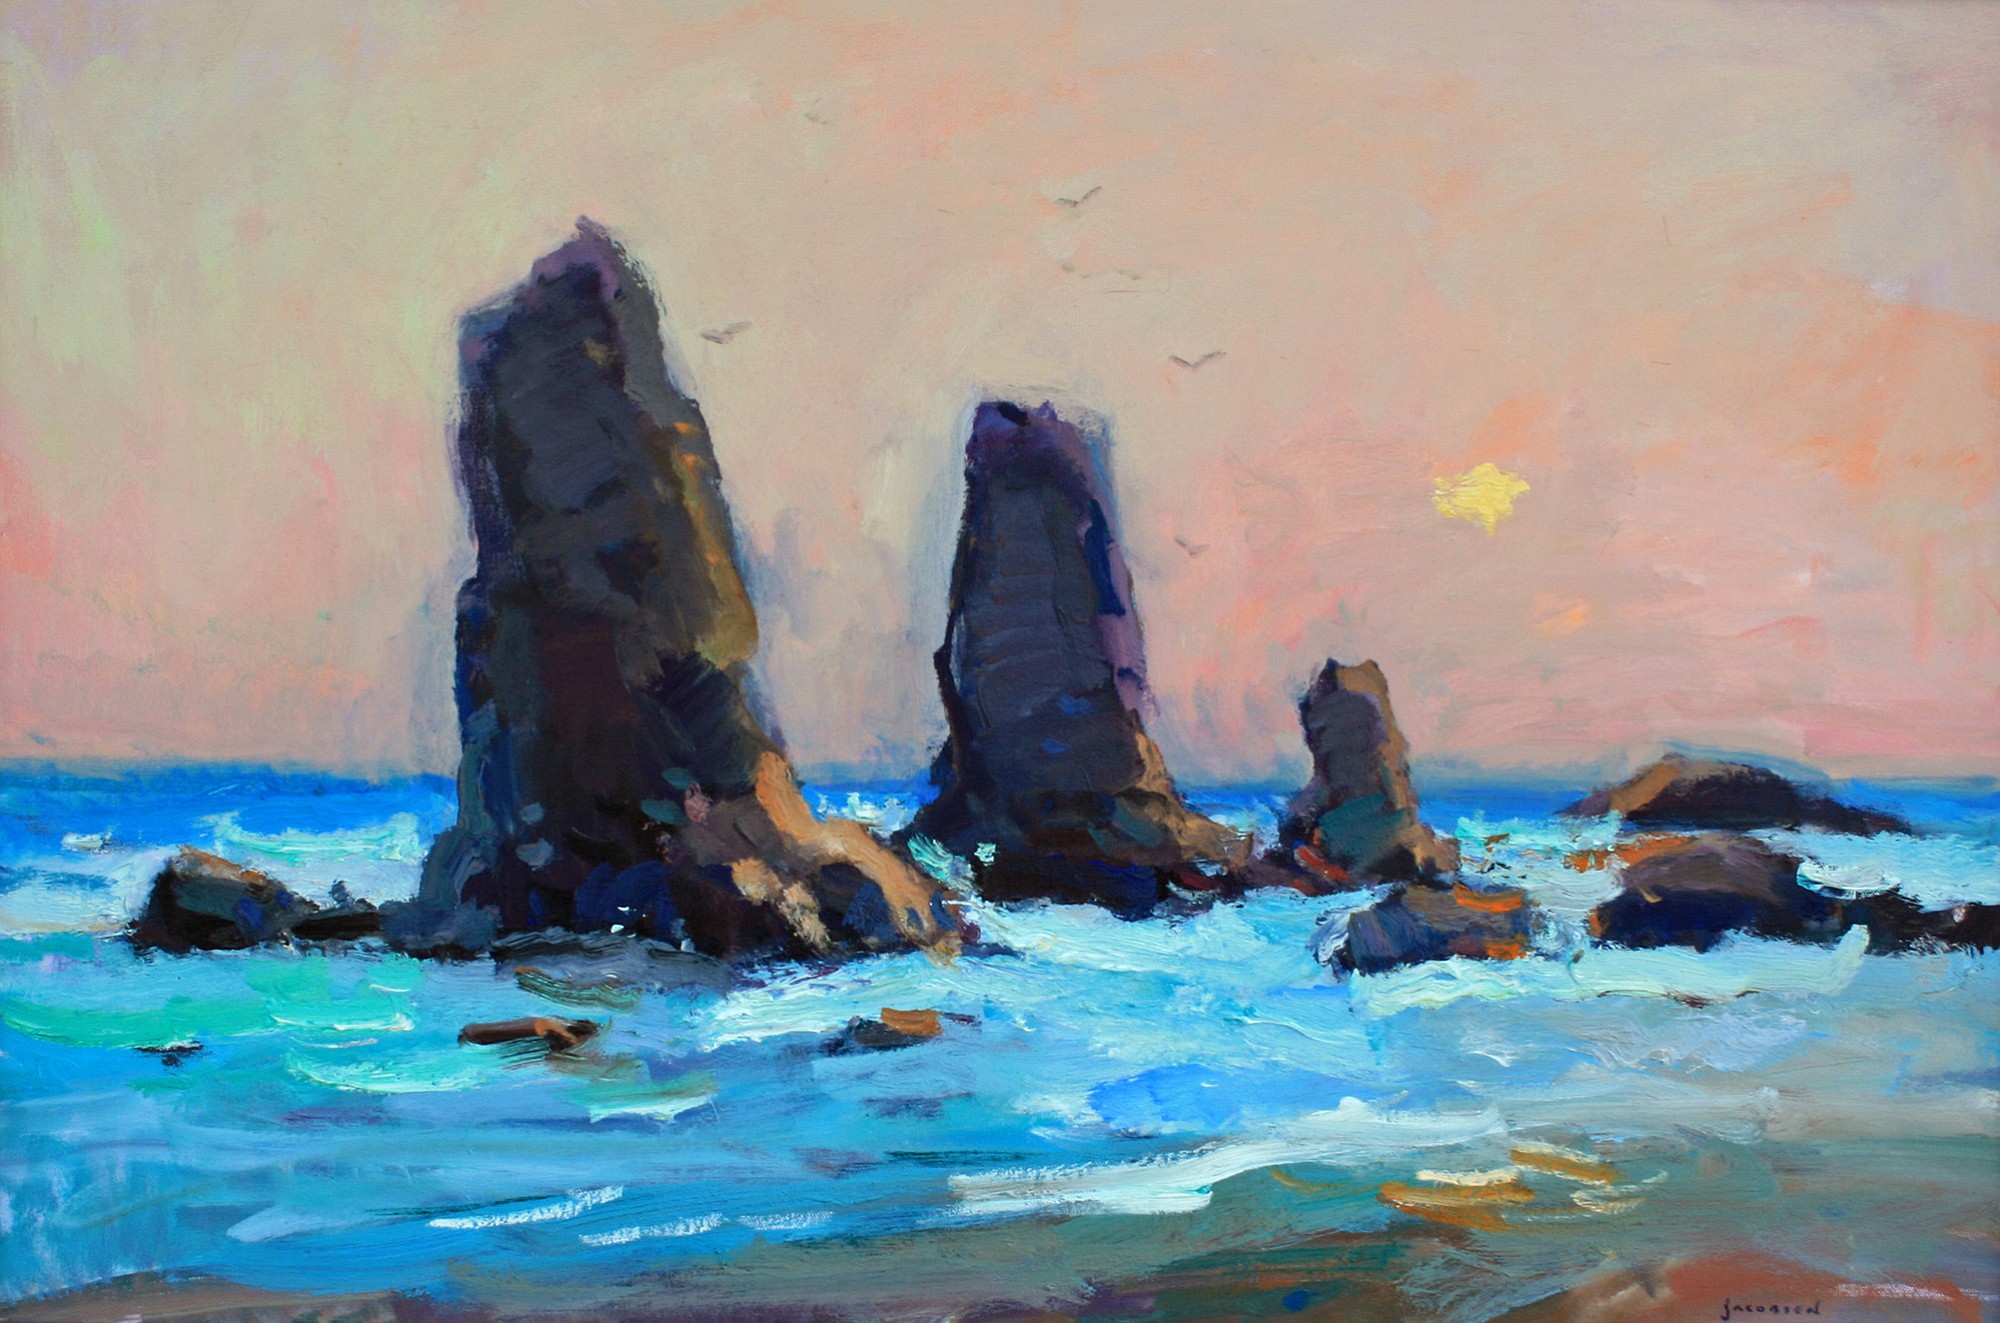 Plein air painter Eric Jacobsen presents his solo show &quot;Color and Light&quot; June 5 through July 31, 2015 at Art on the Boulevard in Vancouver.